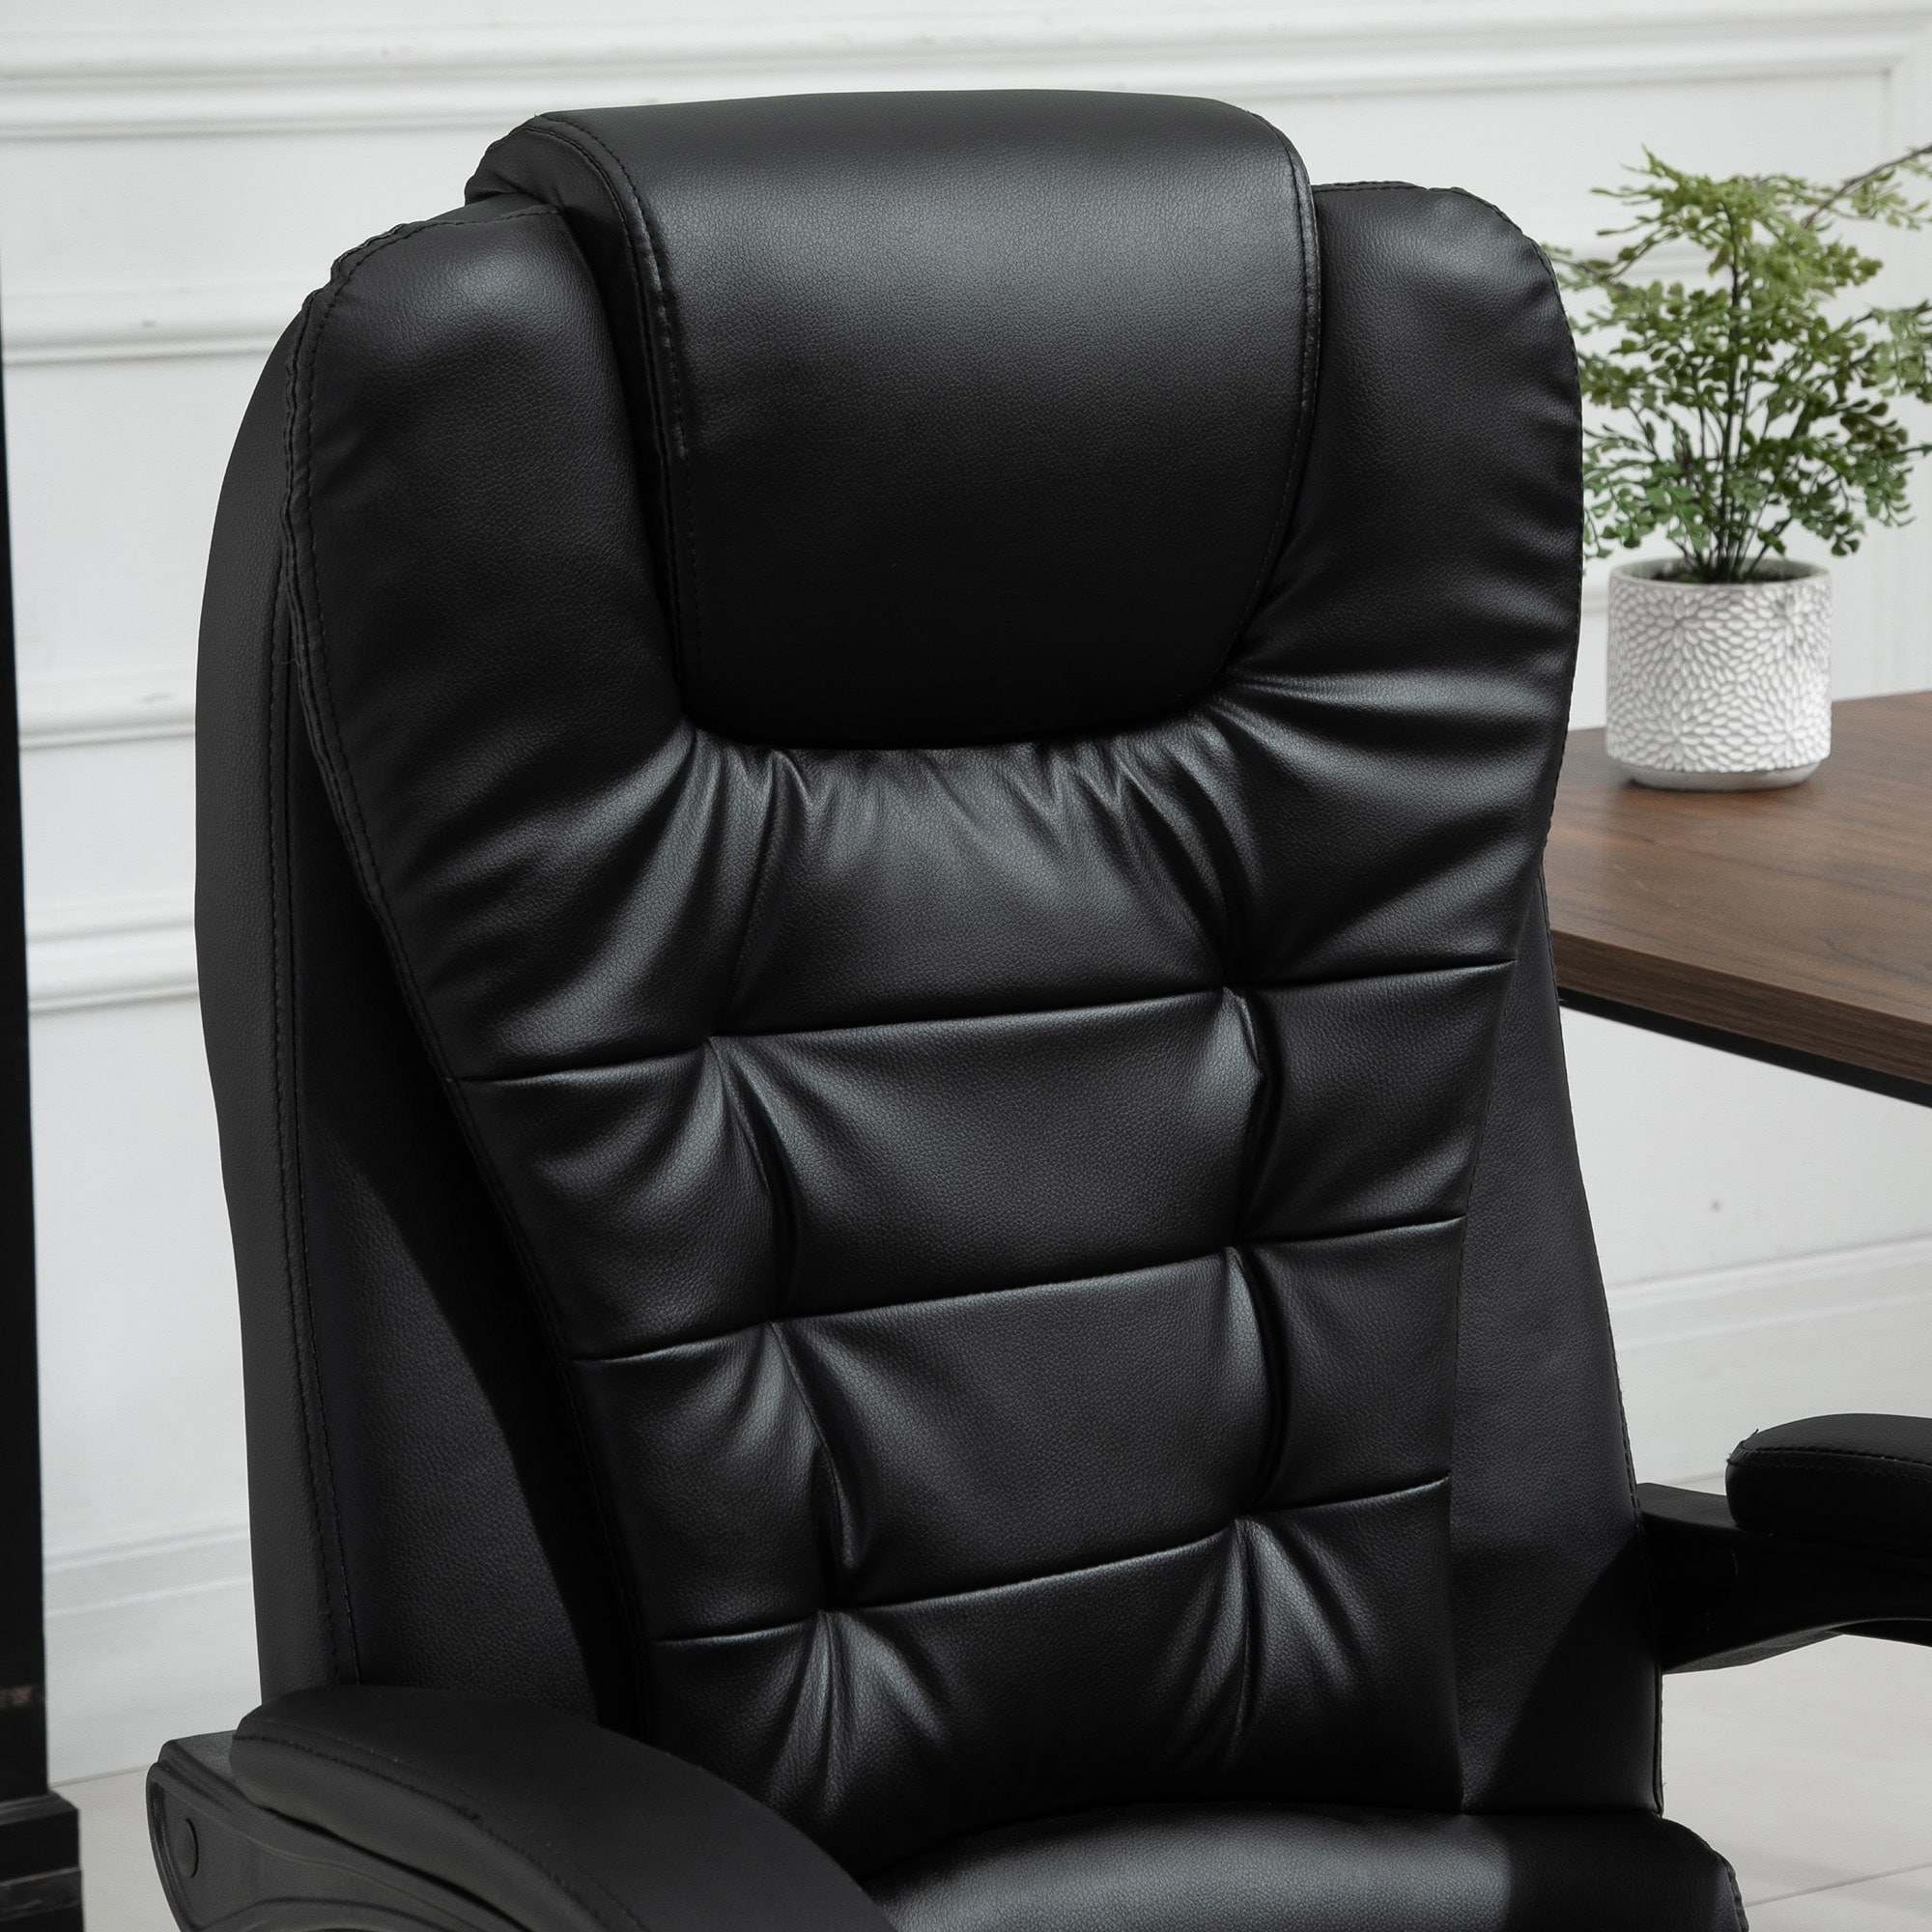 Vinsetto High Back Massage Office Chair with 7-Point Vibration